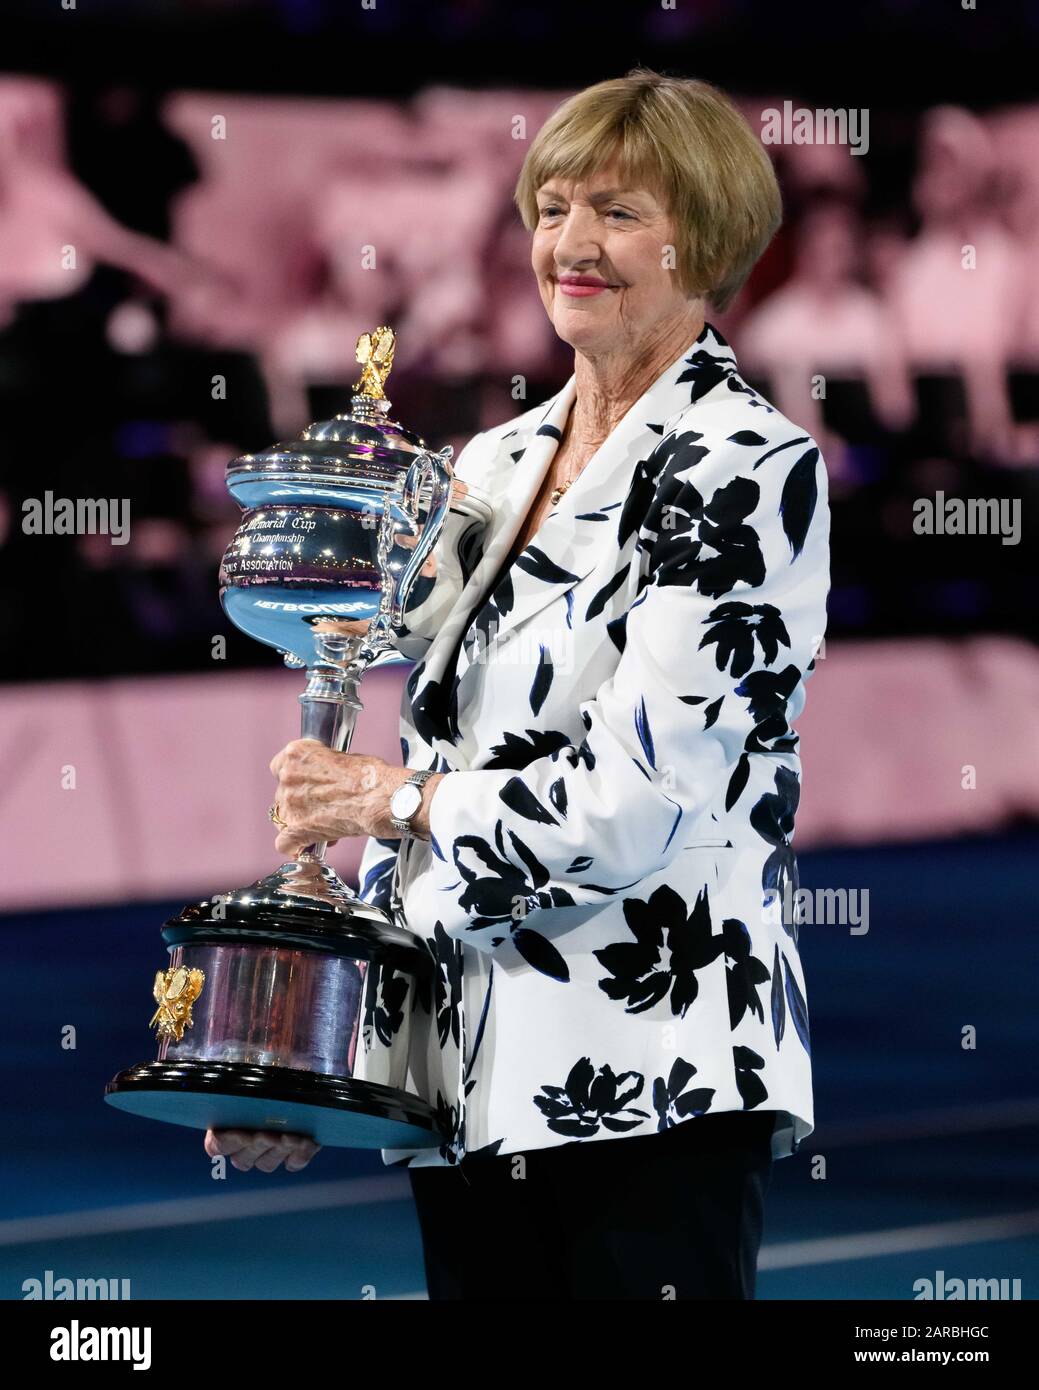 Melbourne Park Melbourne Australia 27th Jan 2020 Margaret Court Shows Off A Replica Of The Daphne Akhurst Trophy Which Is Presented To The Australian Open Women S Singles Winner Court Was Given The